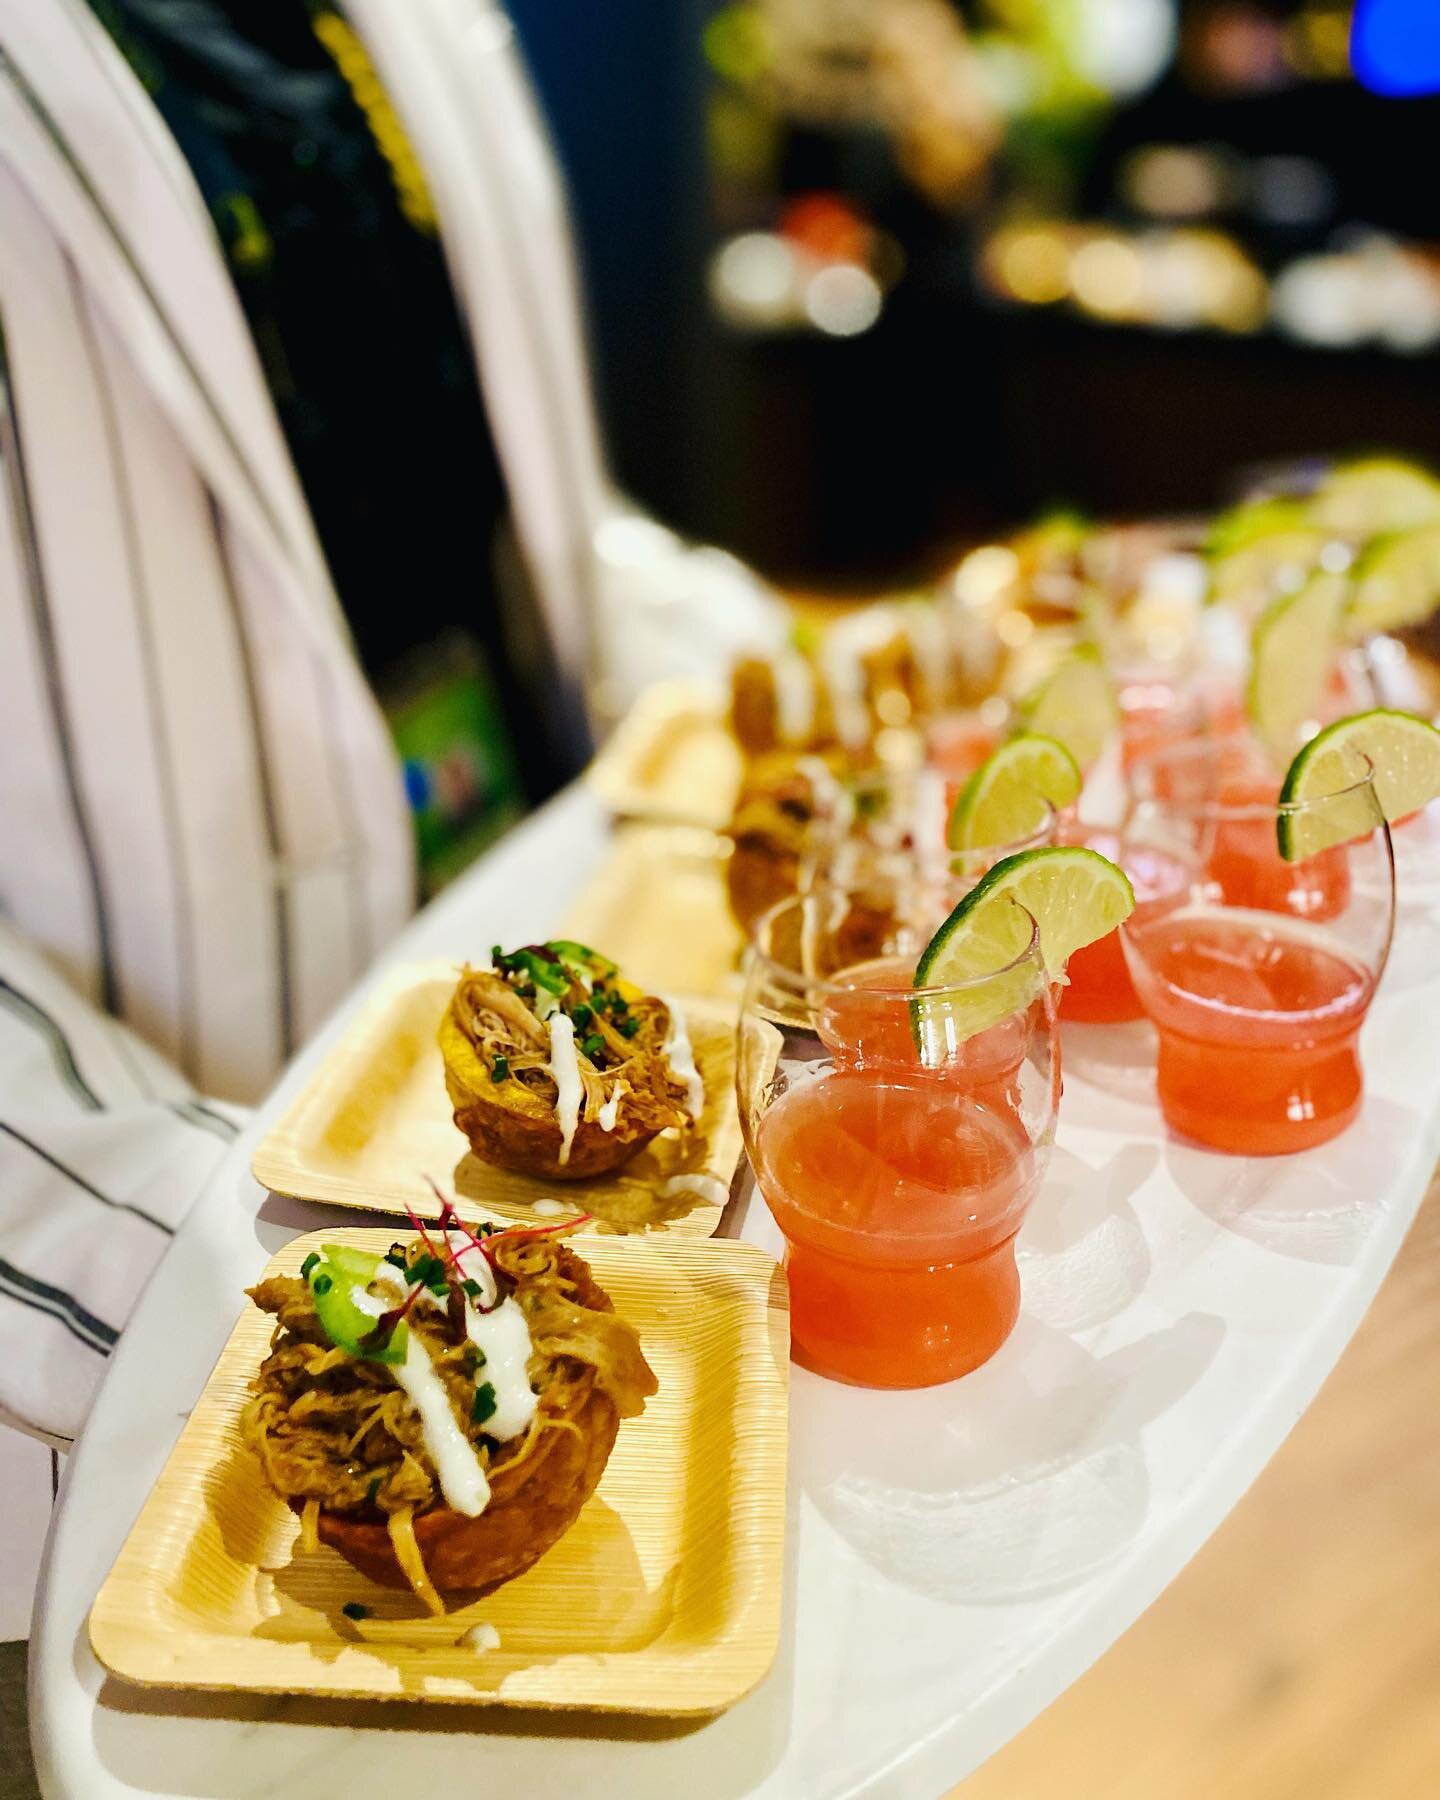 ✨The Bank Shot✨
// jerk chicken bites served in plantain cups topped with a lime crema paired with mini prickly pear margaritas //

#bankshot #jerkchicken #pricklypear #margarita #nbafinals #chasecenter #tasteofchasecenter